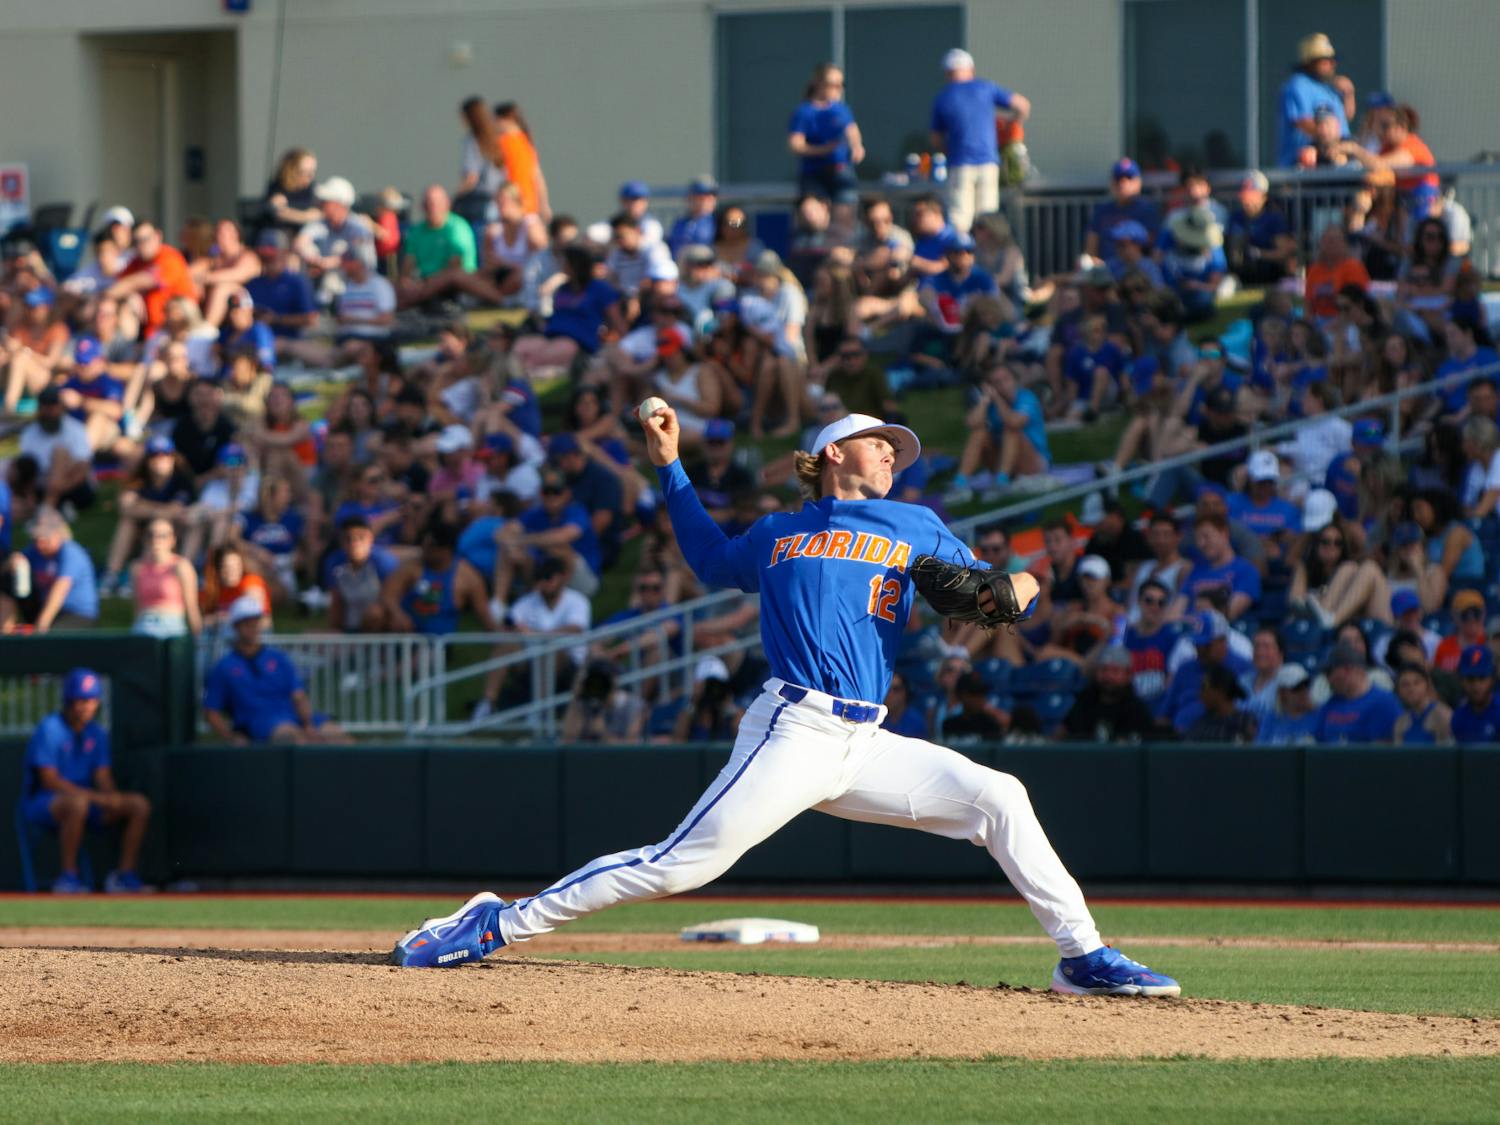 Florida pitcher Hurston Waldrep pitches the ball in the Gators' 13-3 win against the Cincinnati Bearcats Saturday, Feb. 25, 2023.